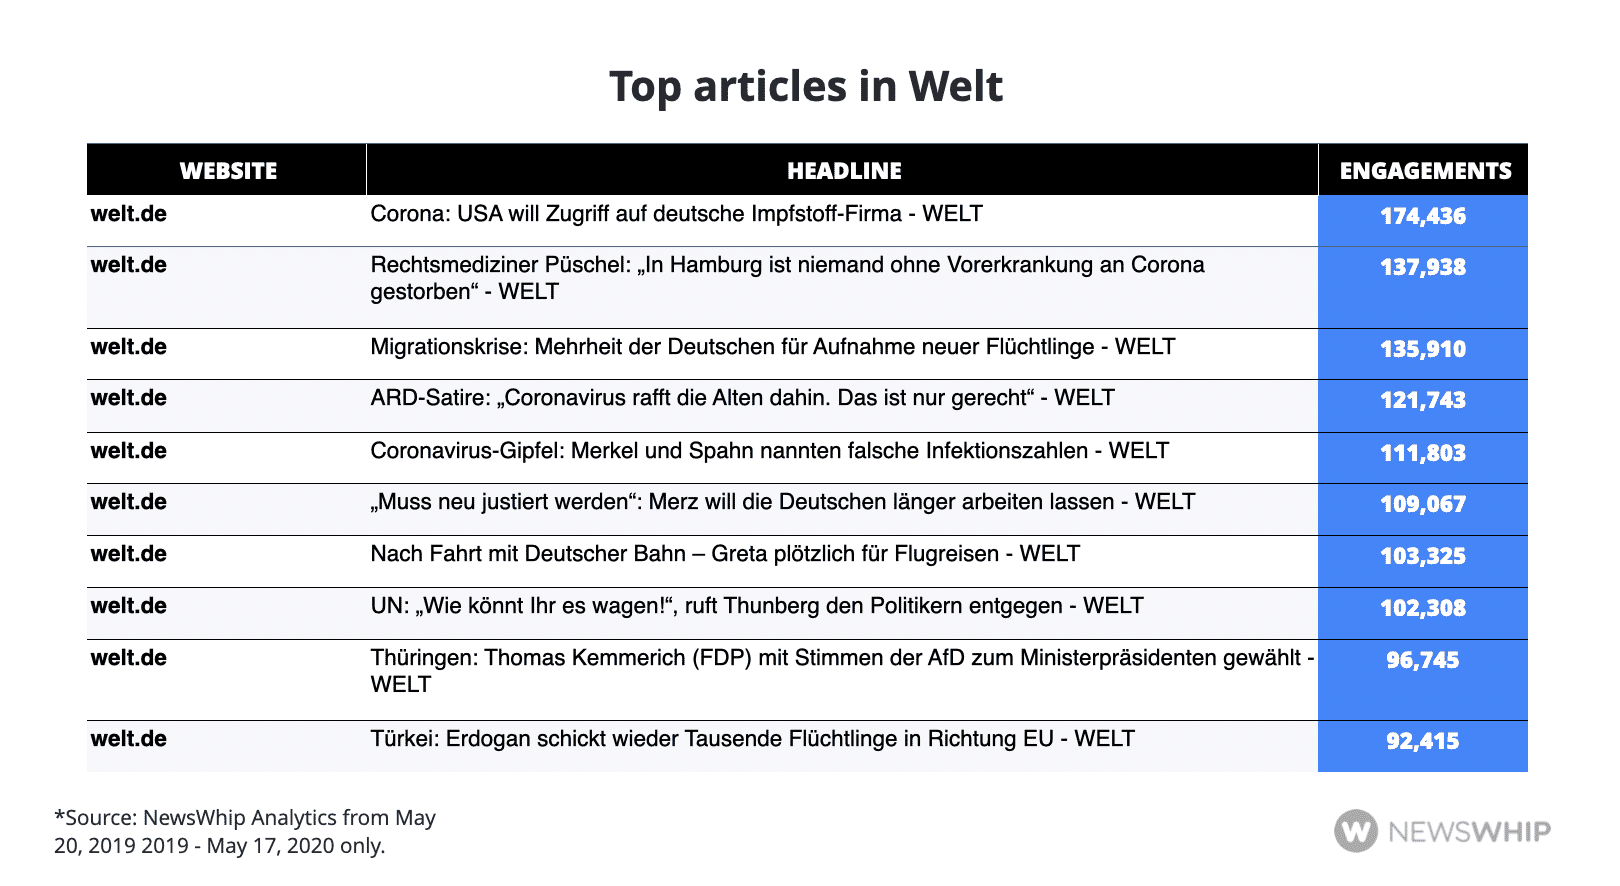 Chart showing the most engaged articles in Welt in the past year, ranked by engagement